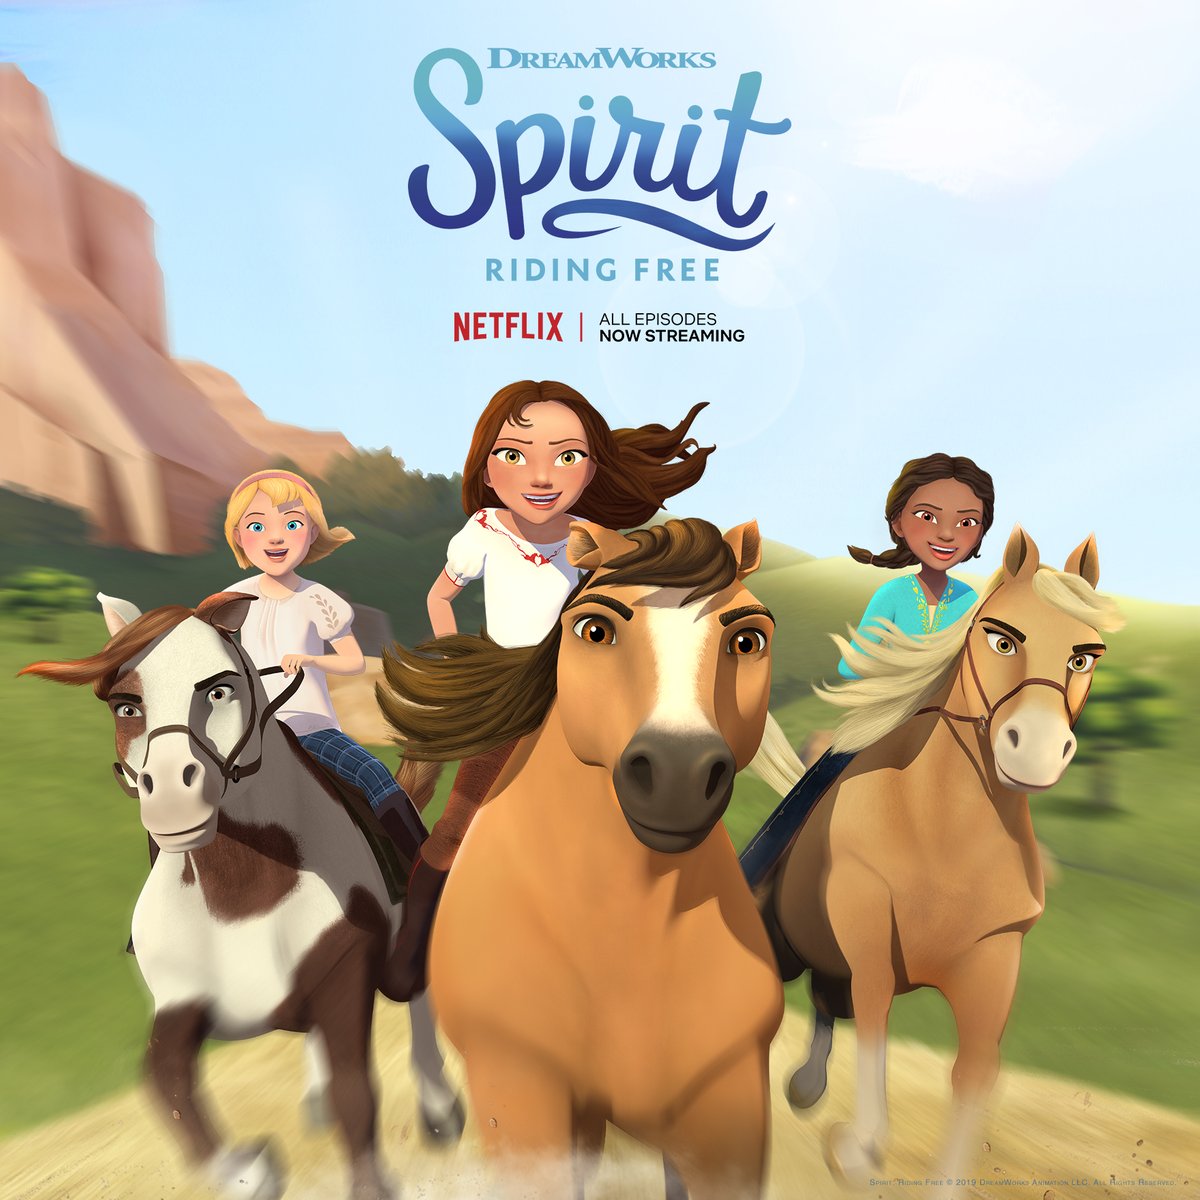 Spirit Riding Free, a show about three best friends going on adventures wit...